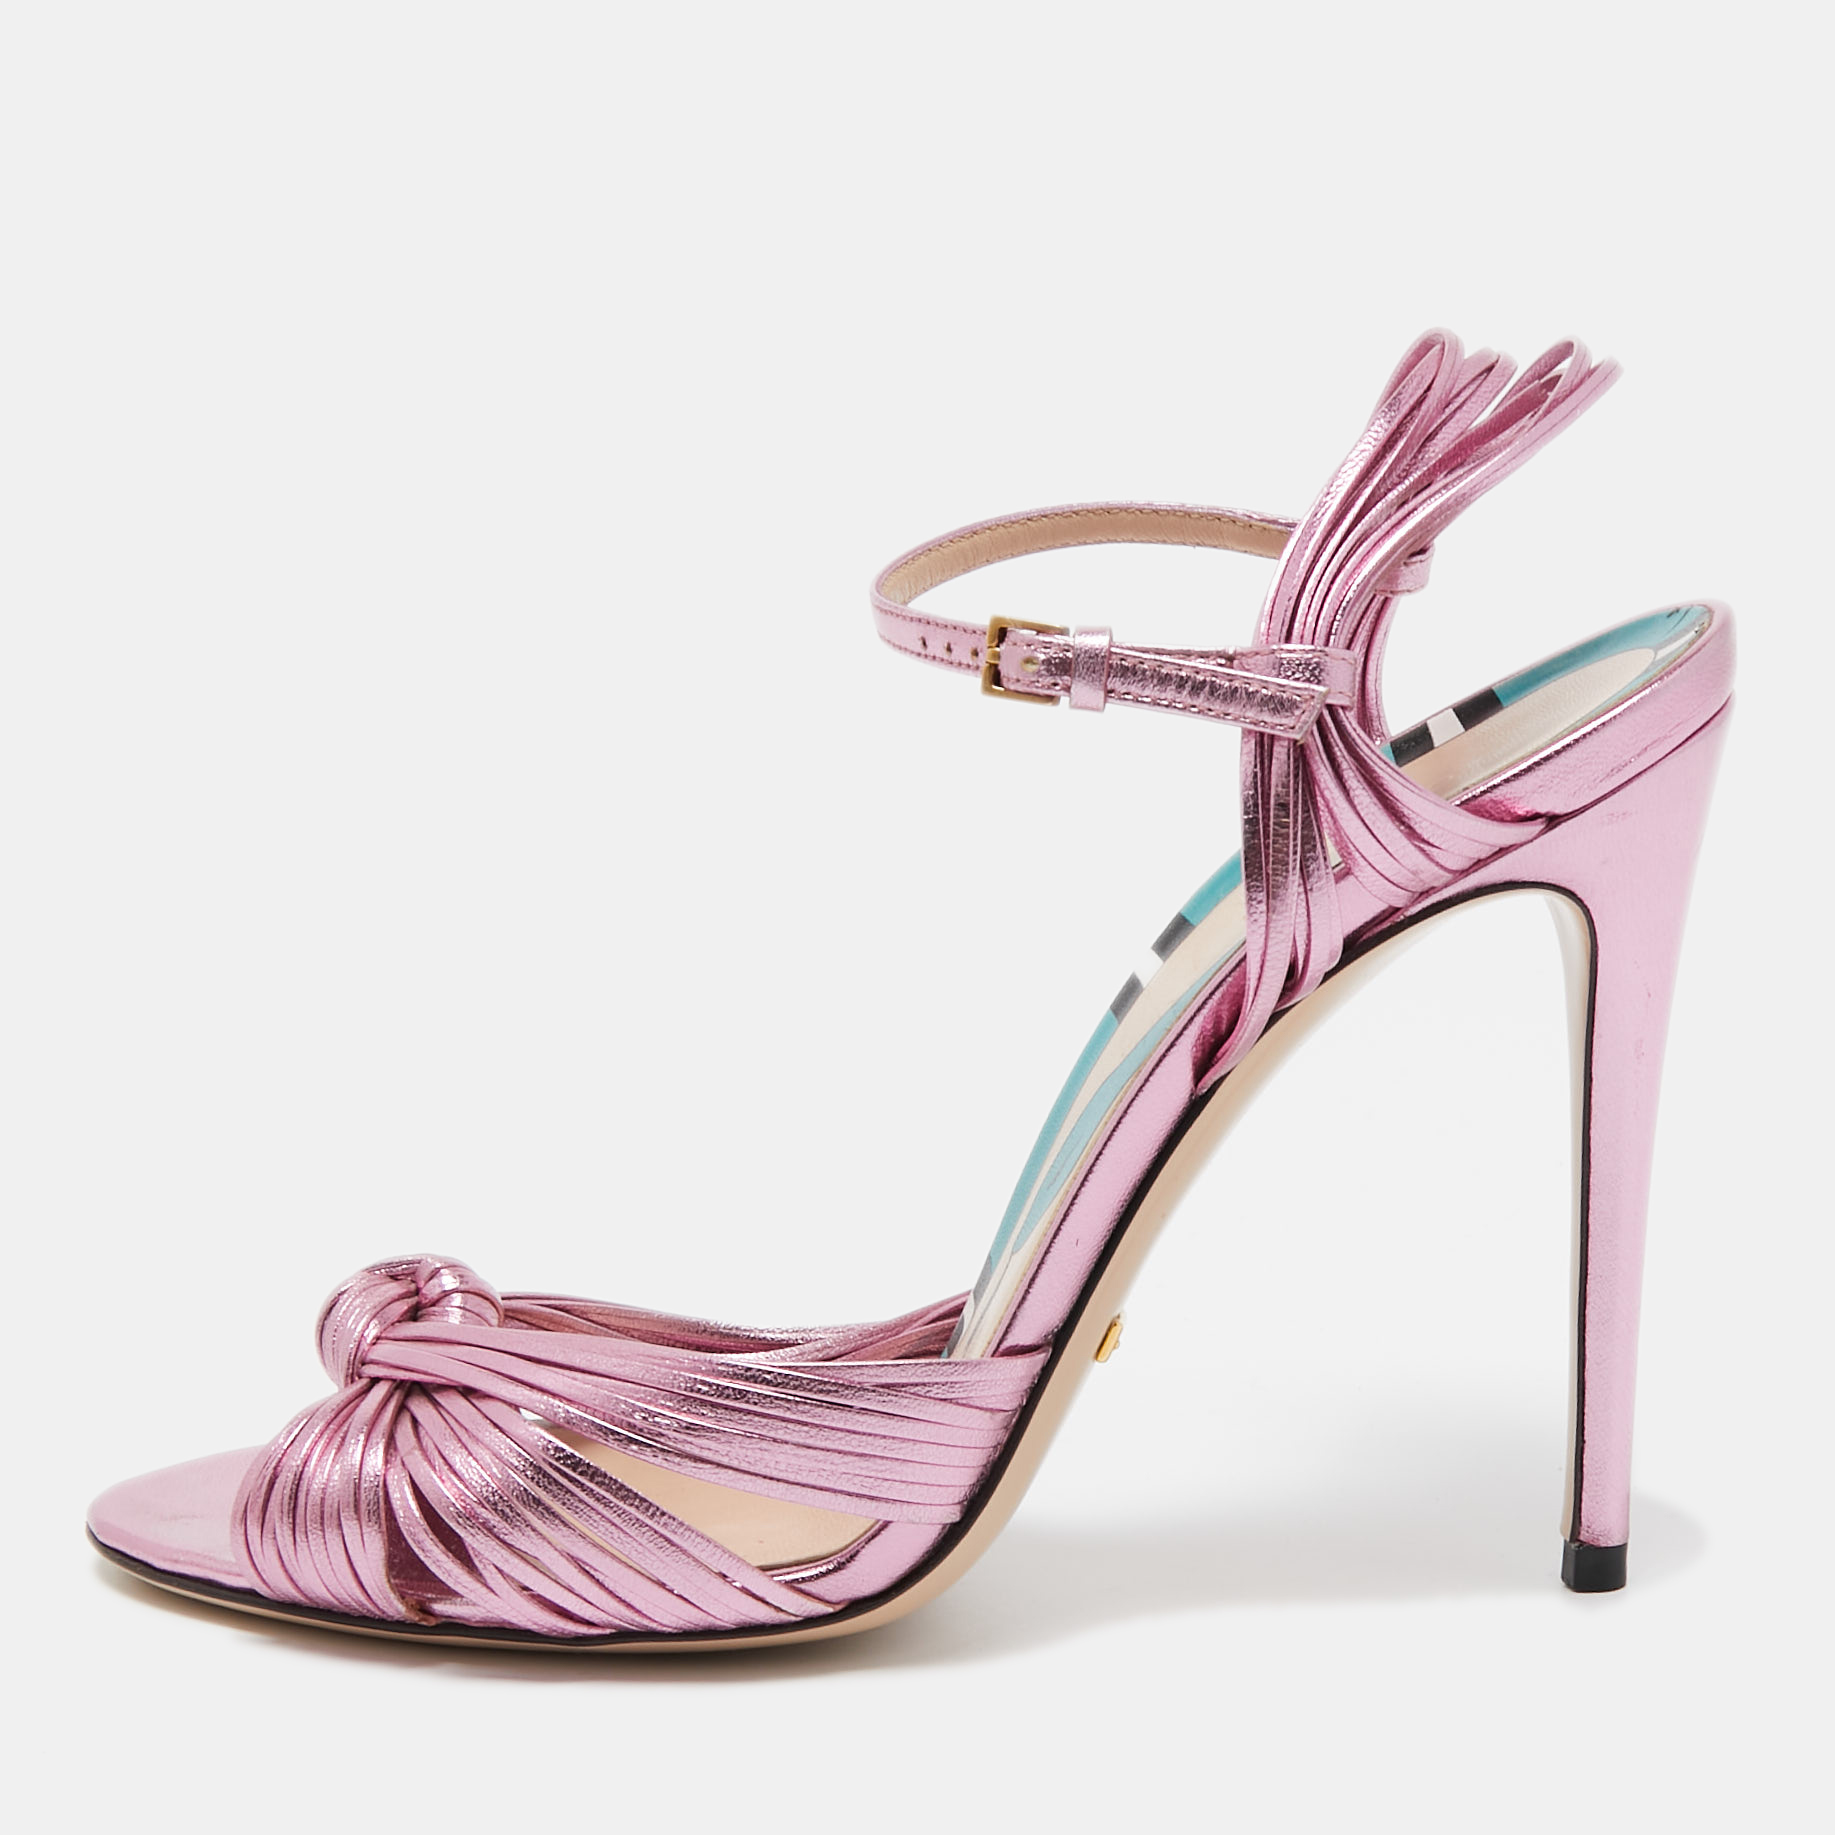 Gucci Metallic Pink Leather Allie Sandals Size 37.5